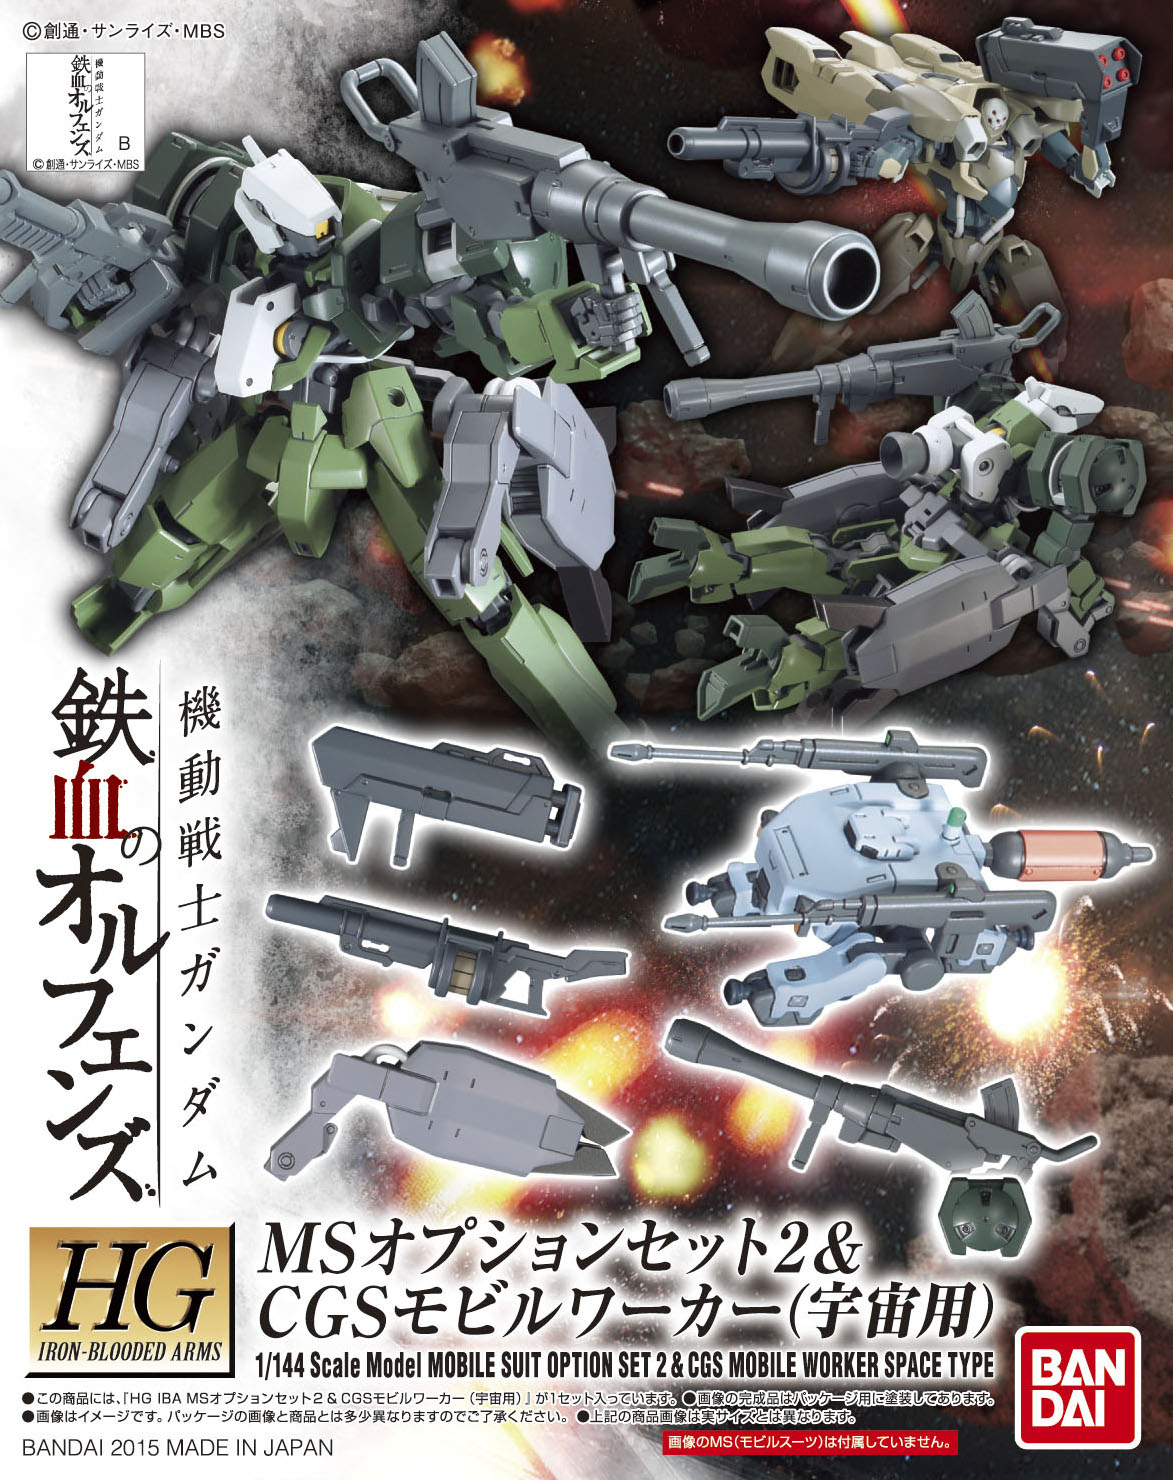 HG 1/144 MSオプションセット2＆CGSモビルワーカー（宇宙用） [Mobile Suit Option Set 2 & CGS Mobile Worker Space Type]